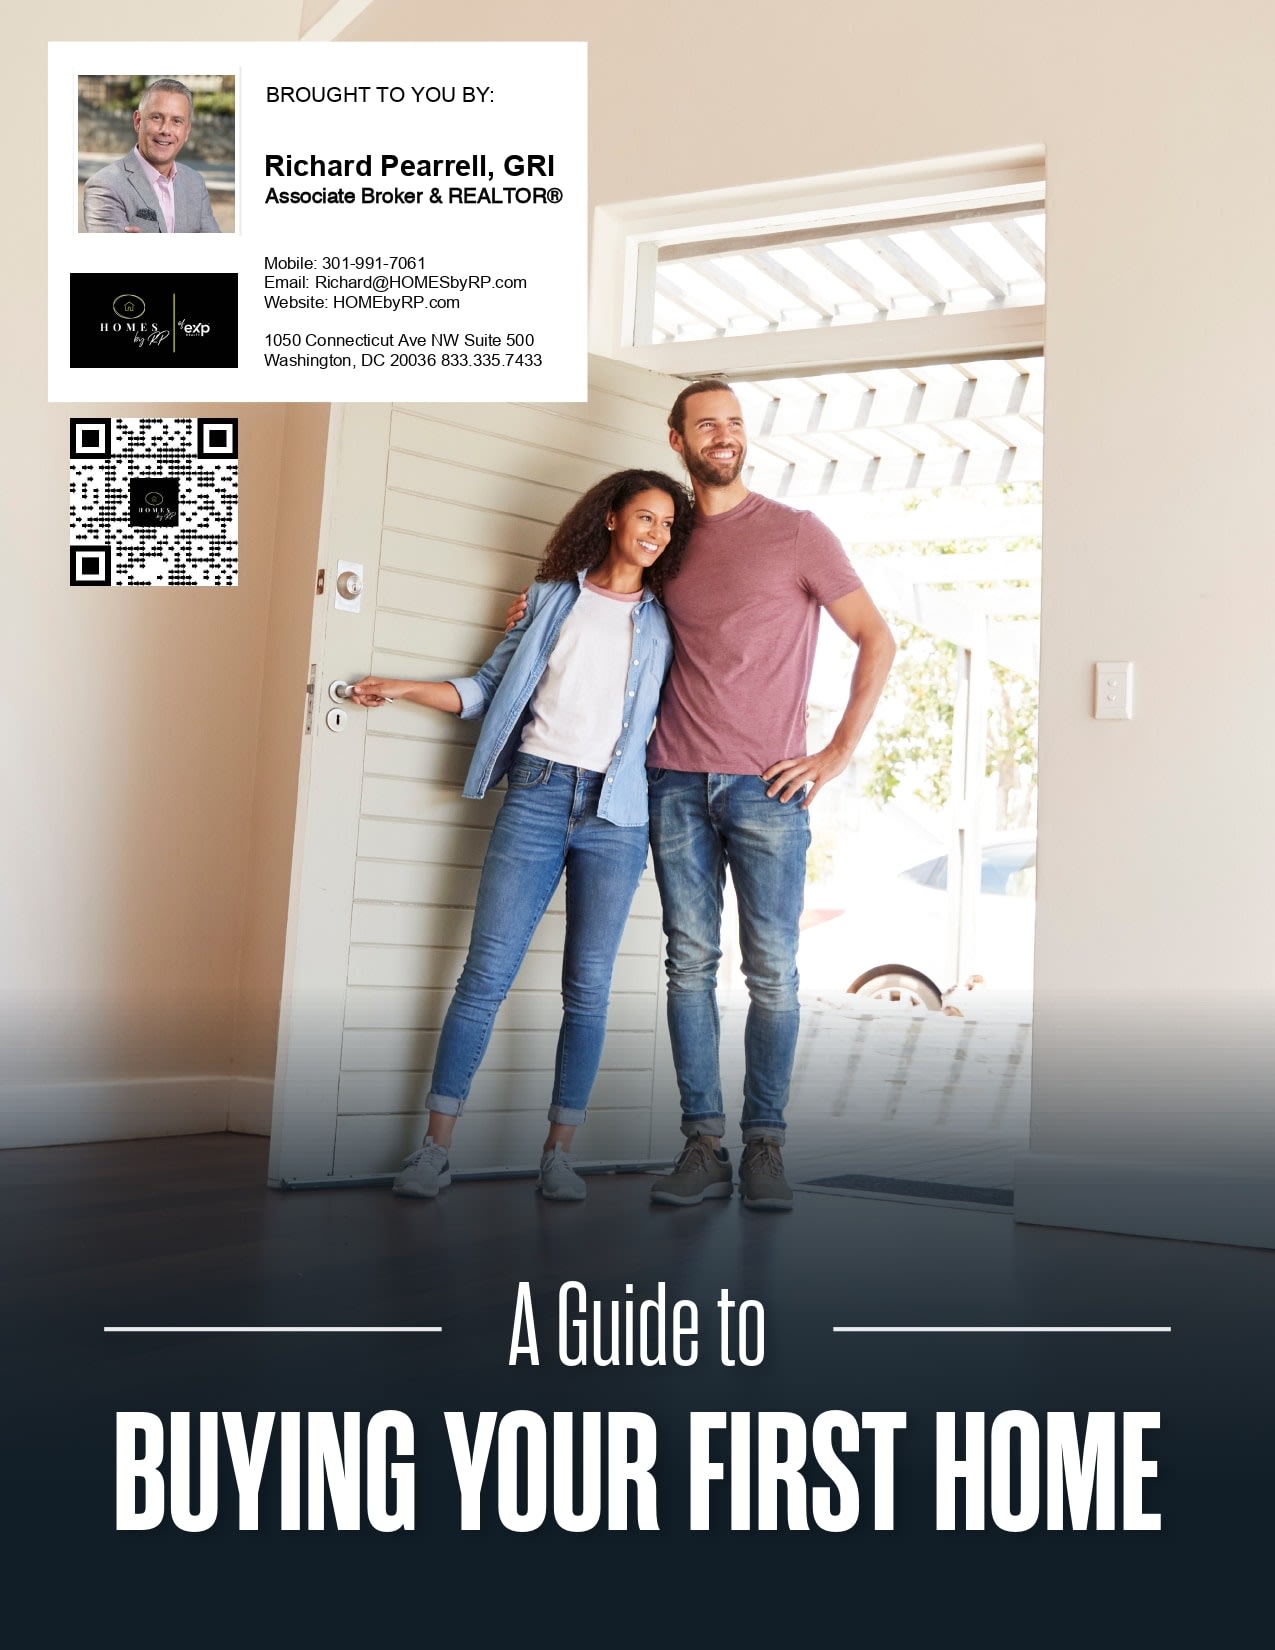 GUIDE TO HOME BUYING